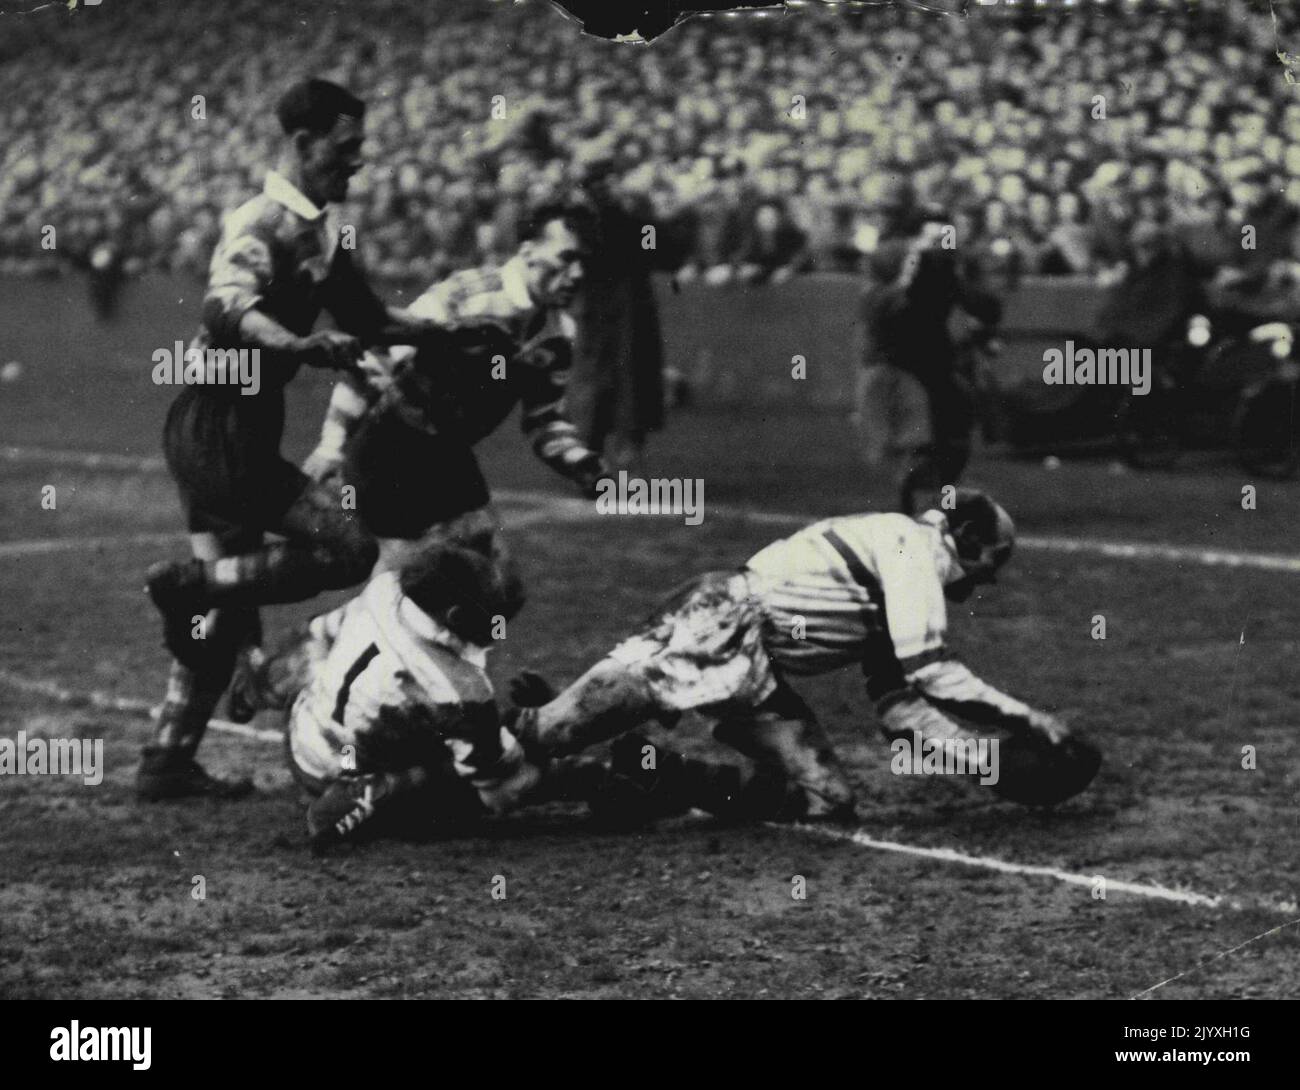 Rugby League Championship Final. Australian right winger Brian Bevan (Warrington) scores The try Which helped Warrington to win the League Championship Cup. Second successive season for the another Australian Harry Bath kicked two penalty goals. May 14, 1955. Stock Photo